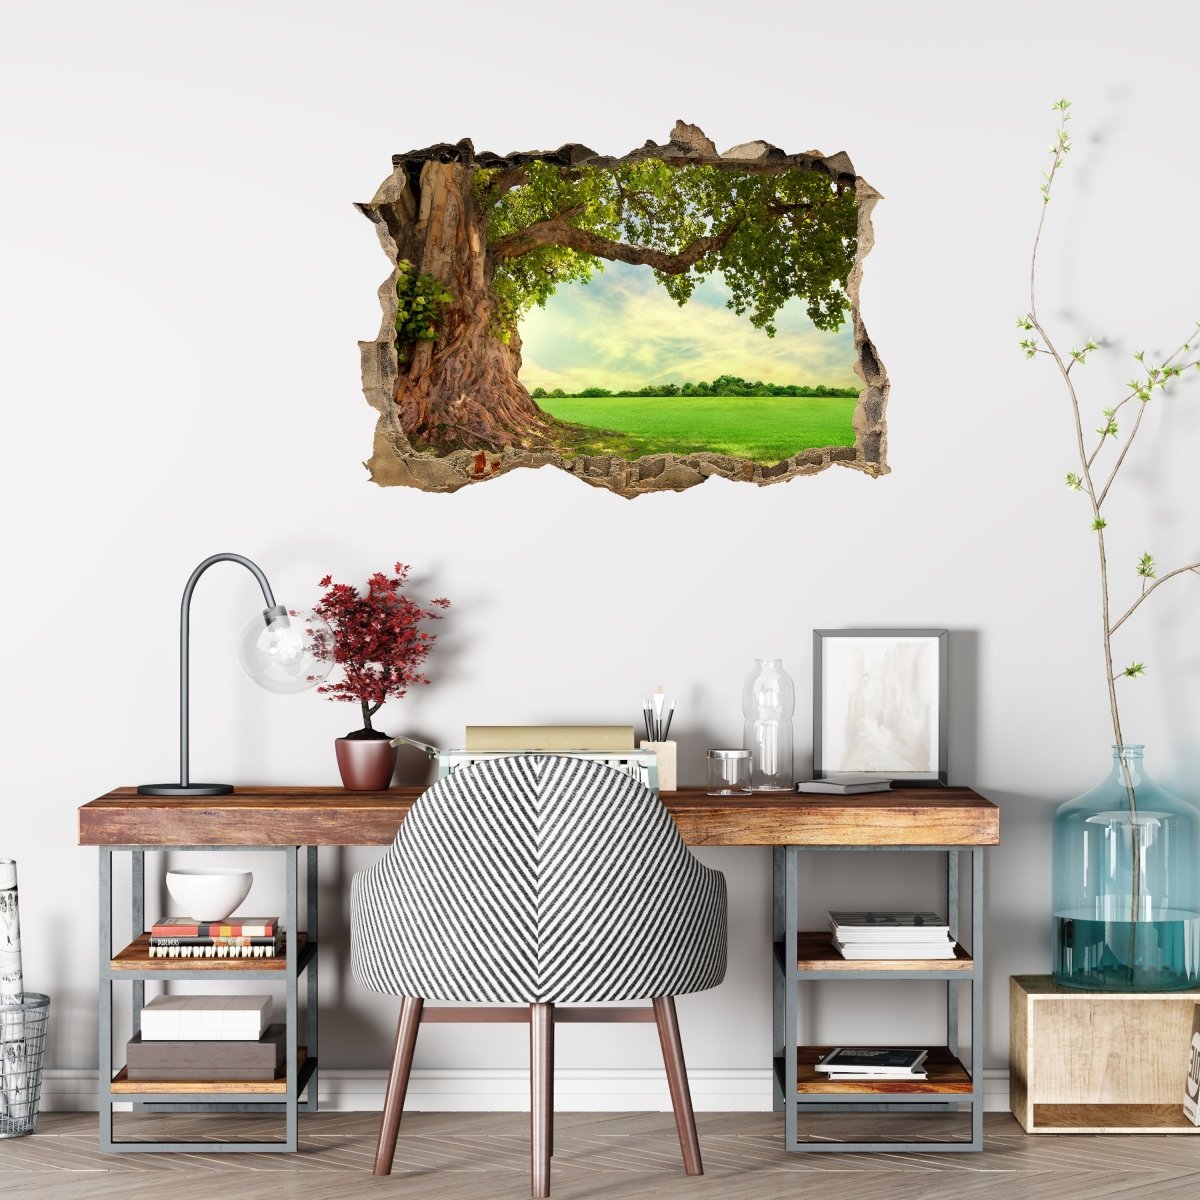 3D wall sticker Spring Meadow - Wall Decal M0715